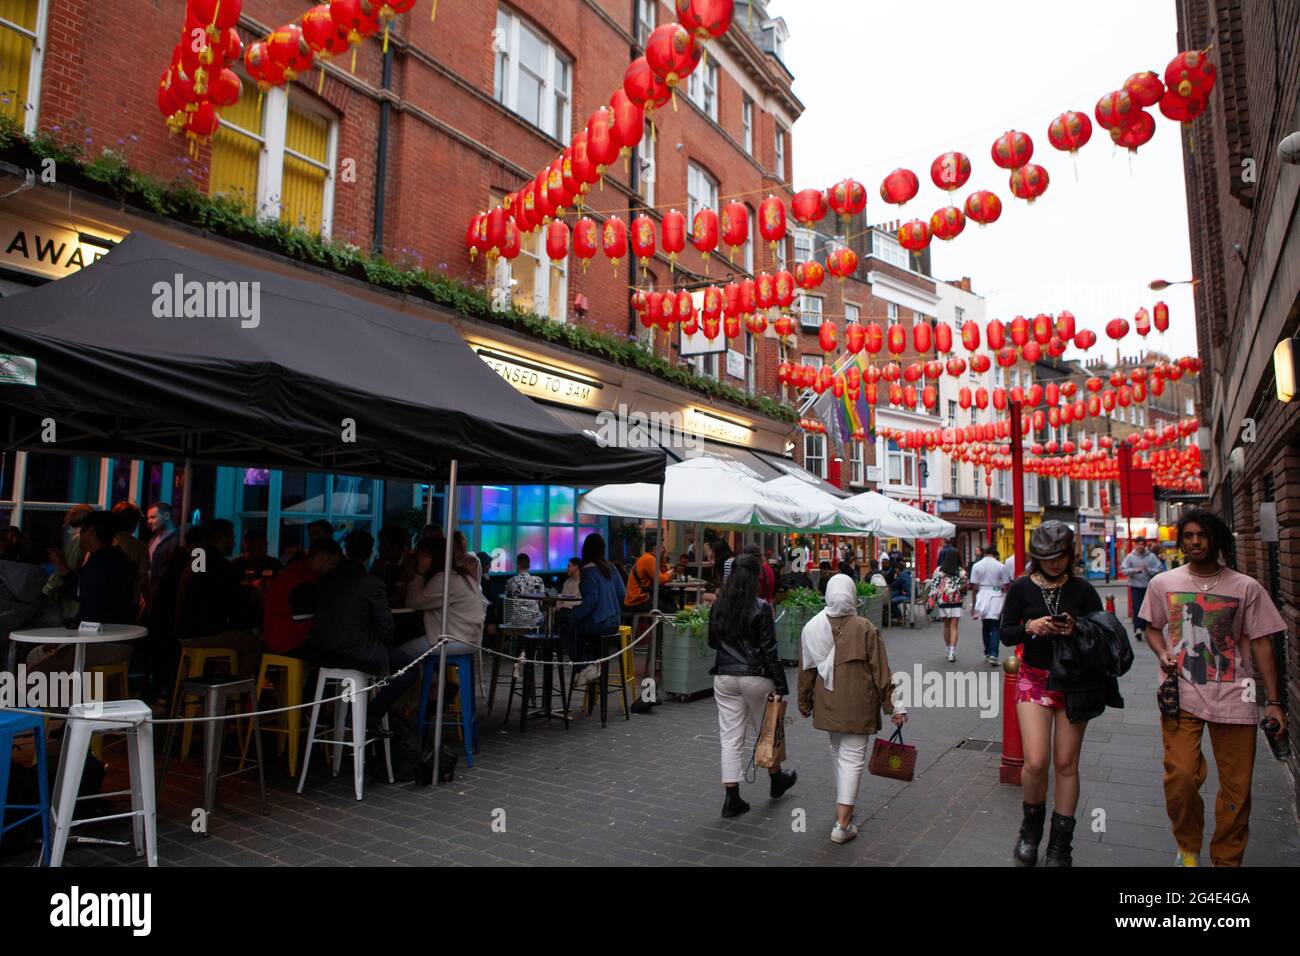 London, UK, 20 June 2021: the streets of Chinatown are busy with customers and despite cloudy weather many people prefer to eat outdoors. Anna Watson/Alamy Stock Photo